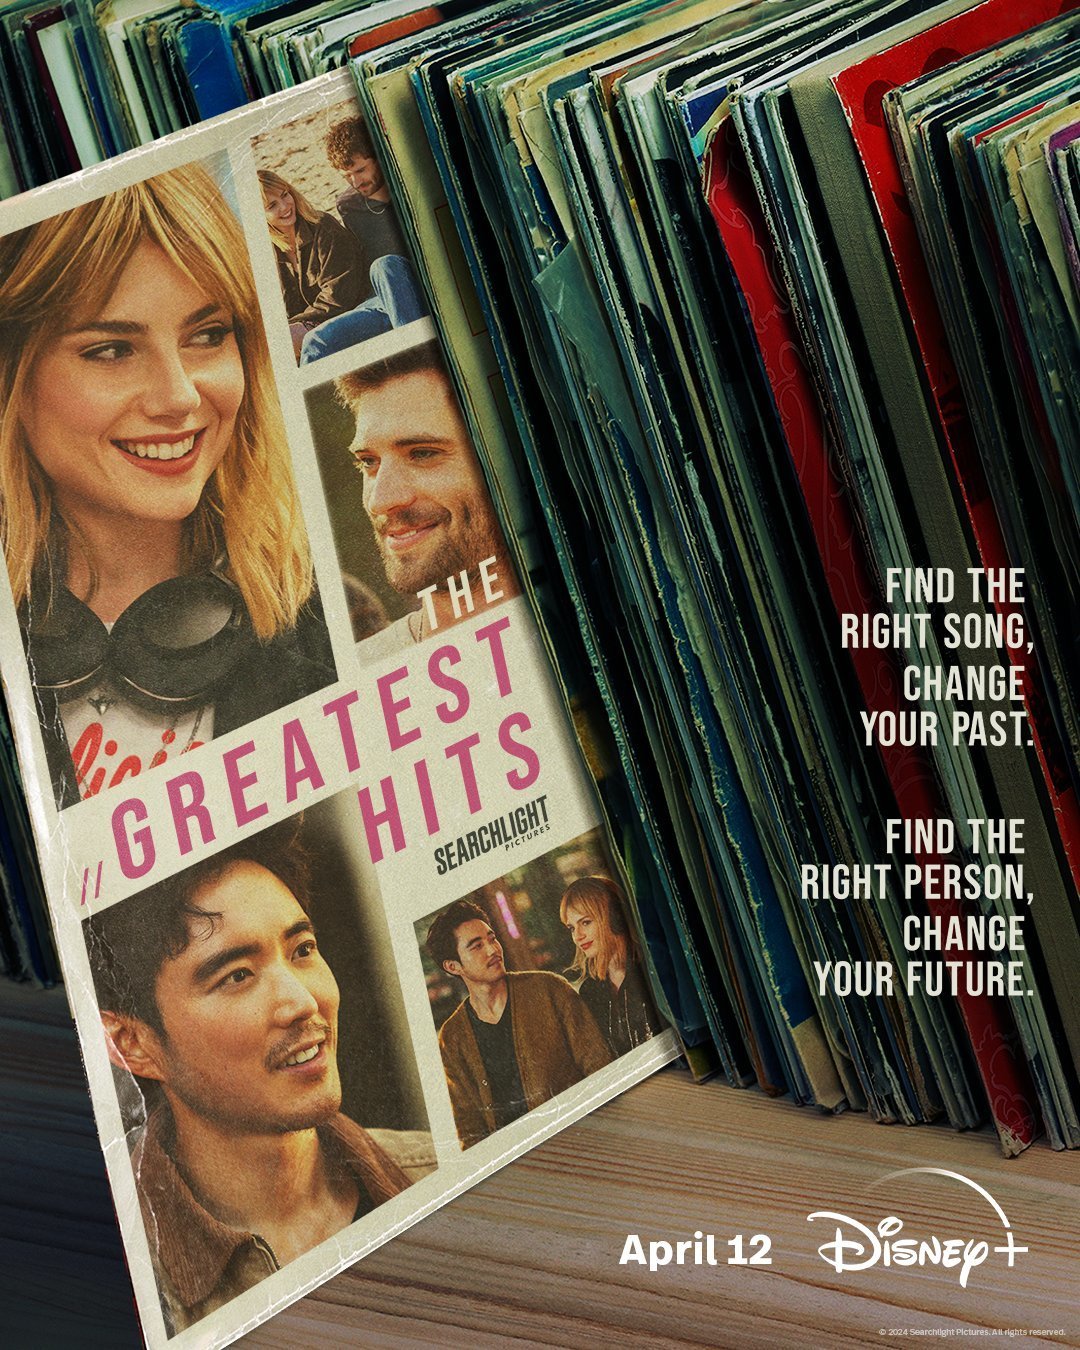 The Greatest Hits is now streaming on Disney+